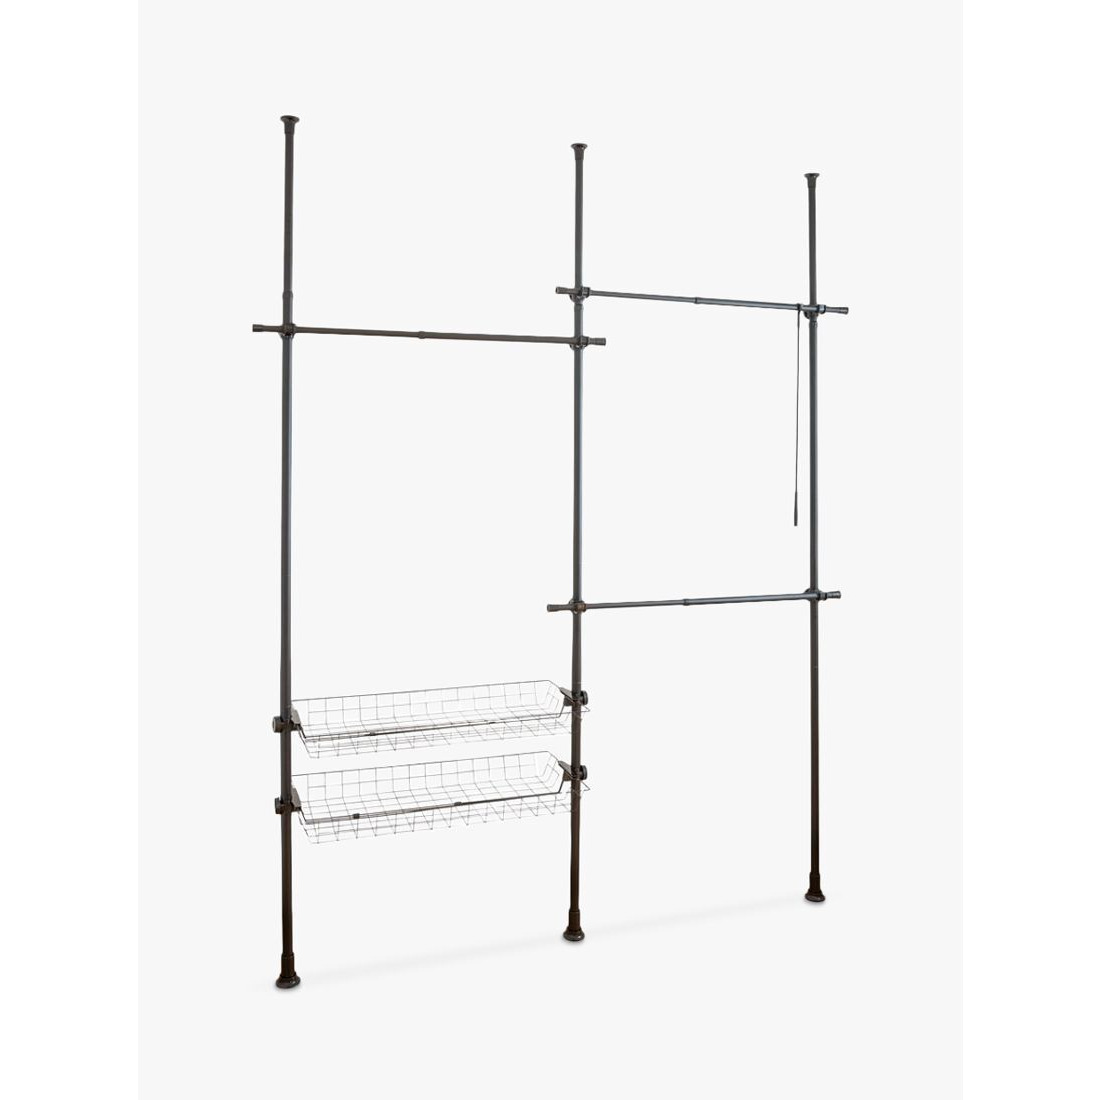 Wenko Double Hercules Clothes Stand, Black - image 1